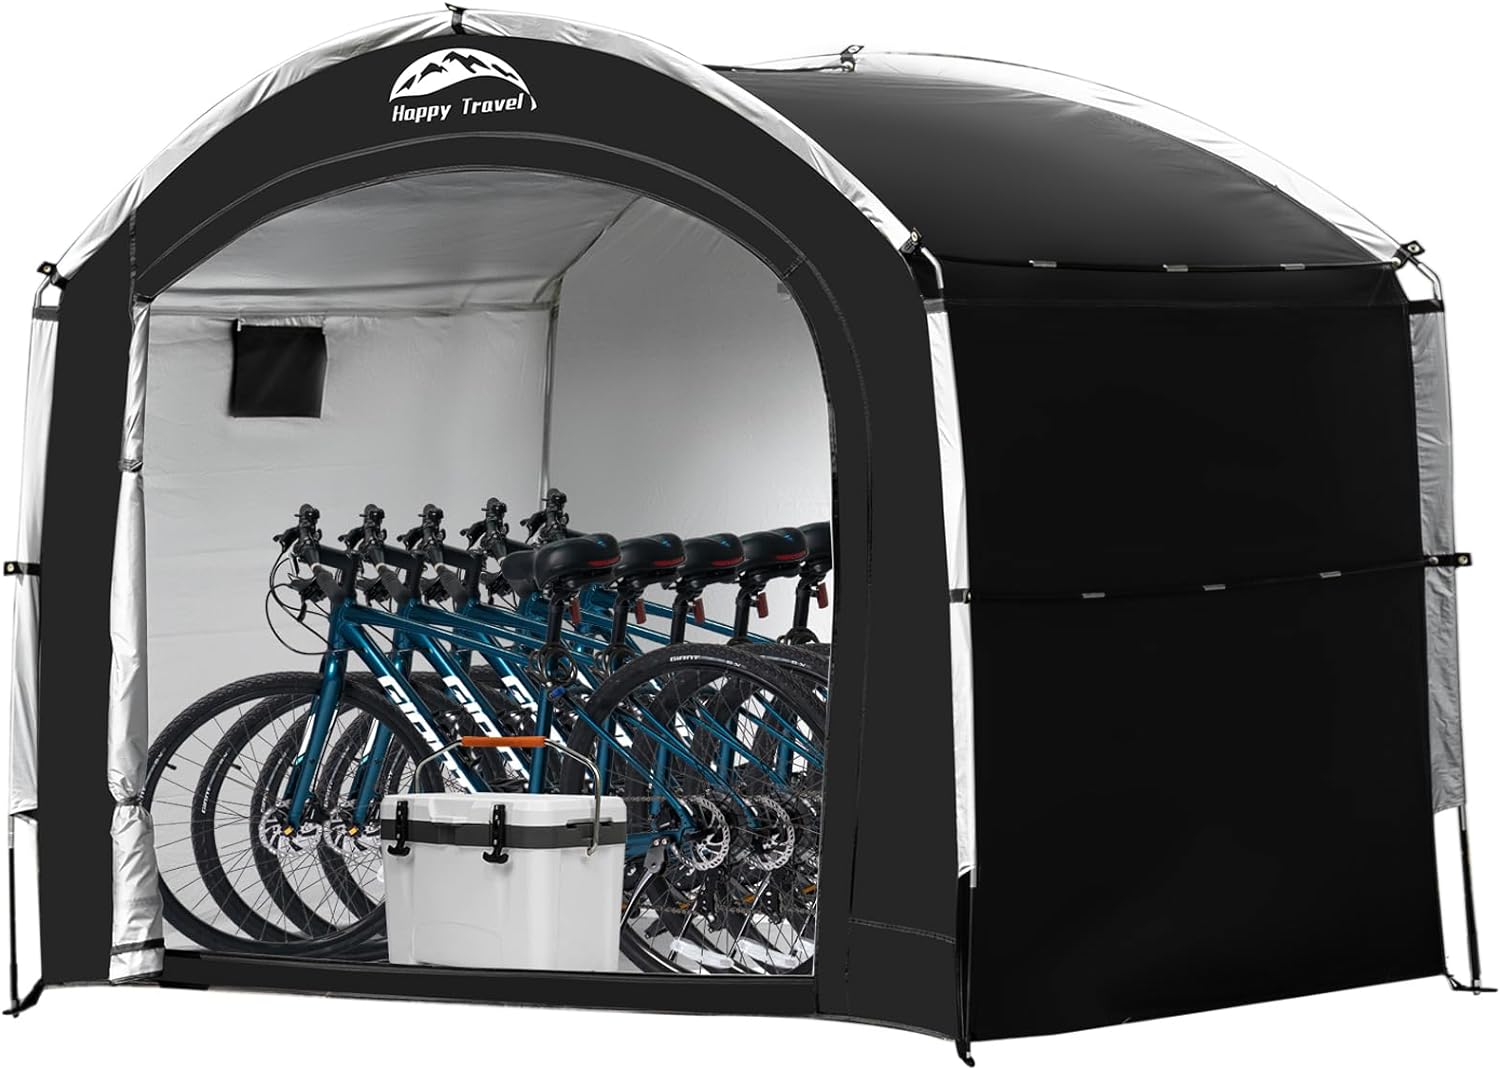 Happy Travel Bike Storage Shed Tent Review